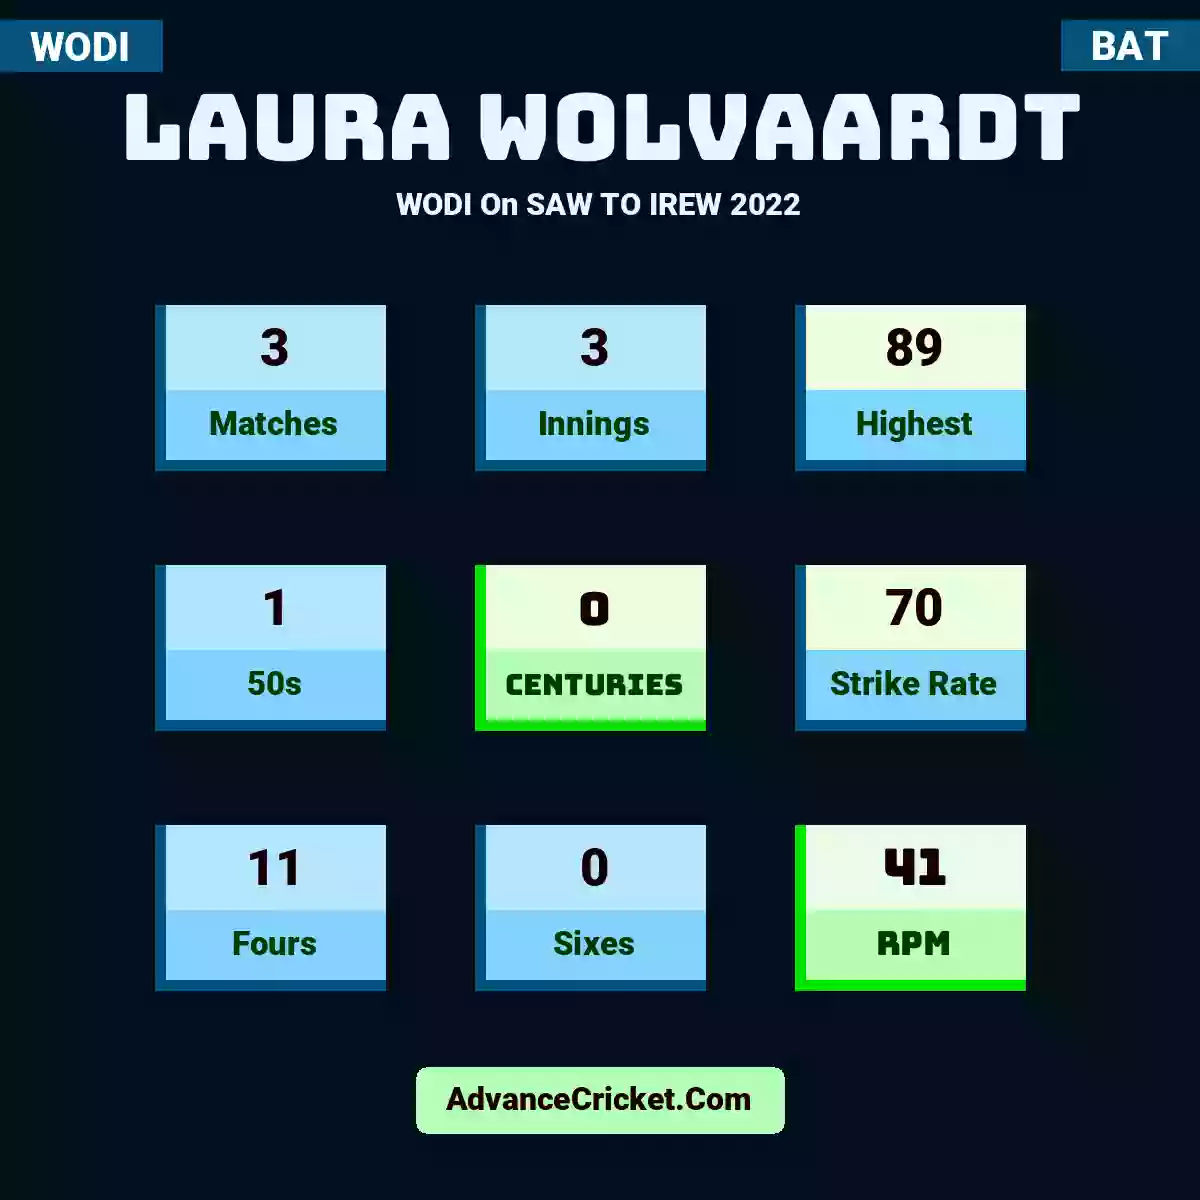 Laura Wolvaardt WODI  On SAW TO IREW 2022, Laura Wolvaardt played 3 matches, scored 89 runs as highest, 1 half-centuries, and 0 centuries, with a strike rate of 70. L.Wolvaardt hit 11 fours and 0 sixes, with an RPM of 41.